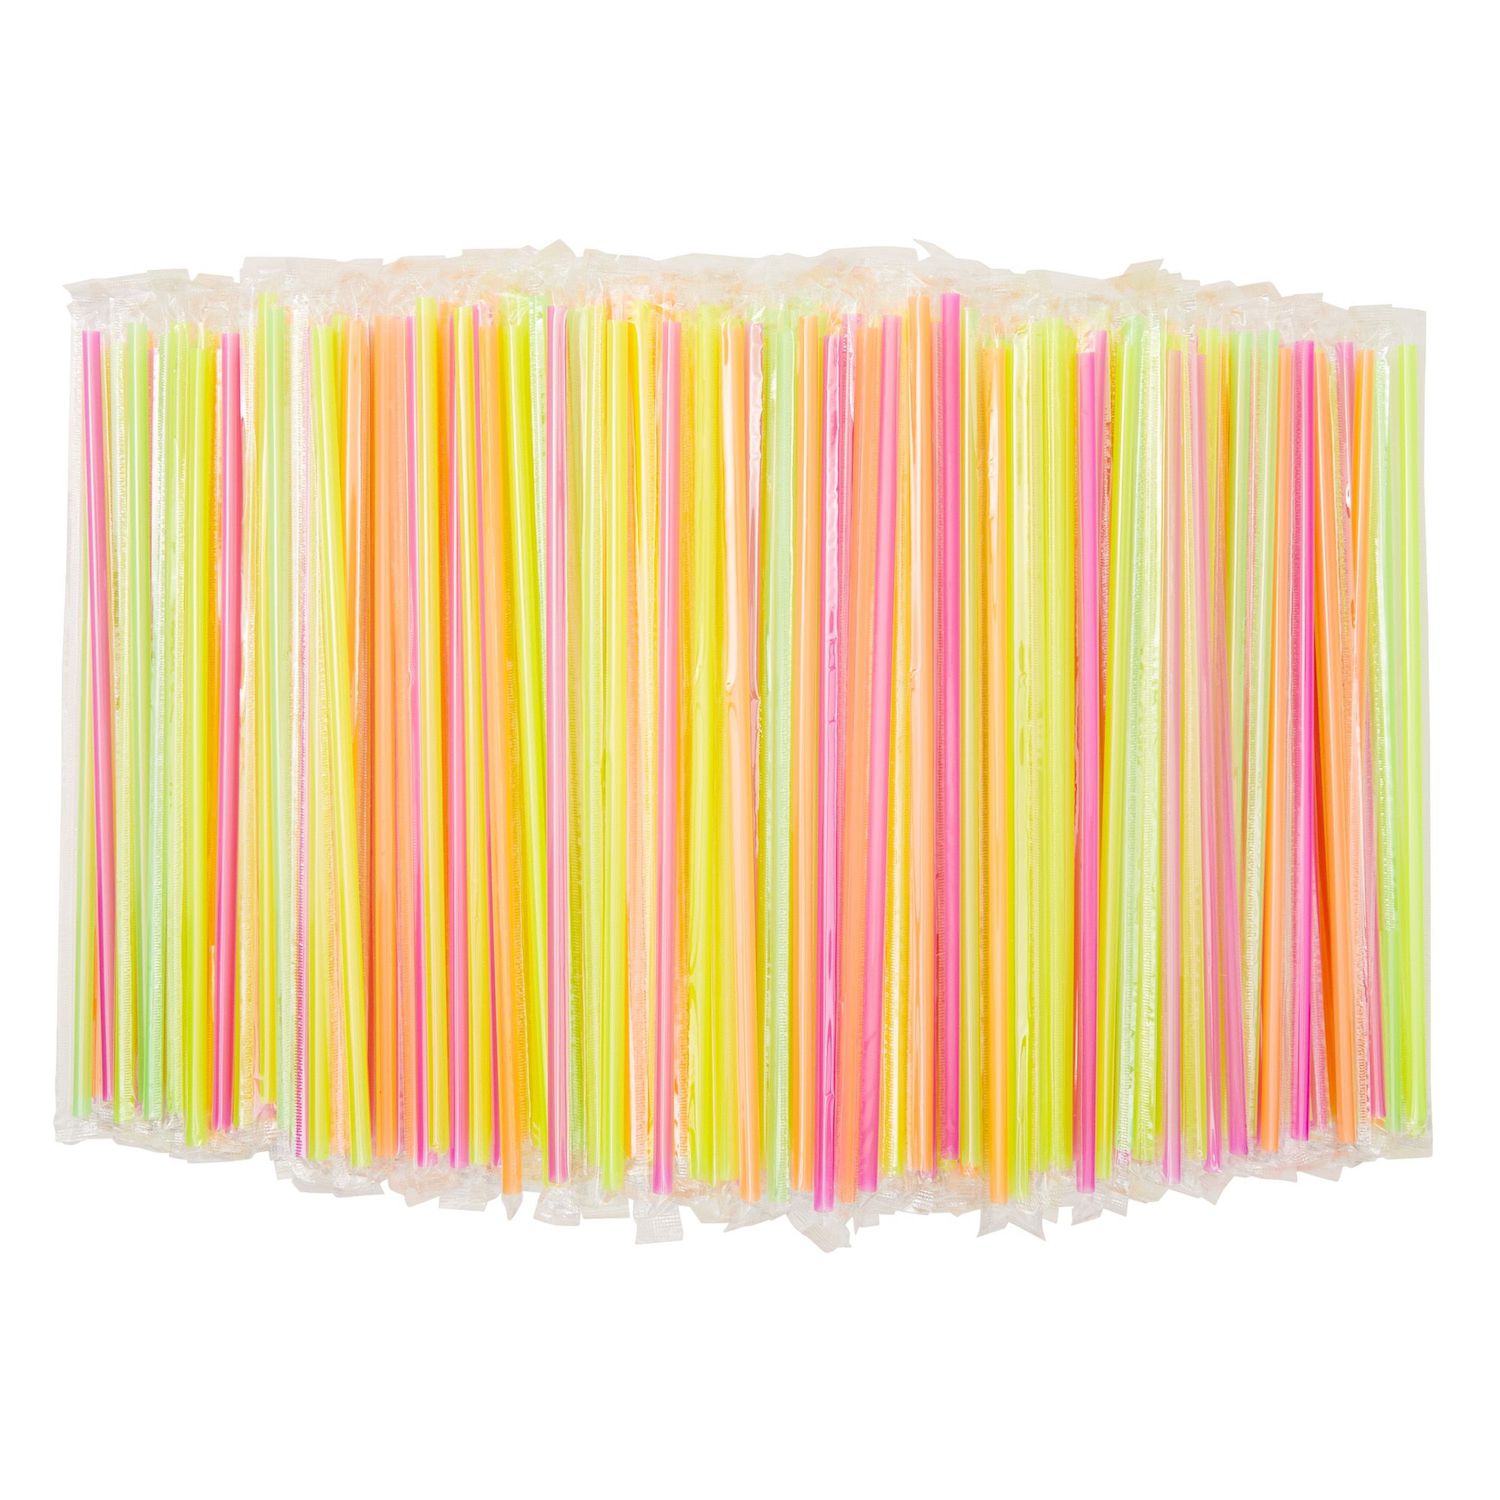 Colorful Plastic Drinking Straws - Flexible, Disposable, Extra-long  Flexible Straws - 100 Pack